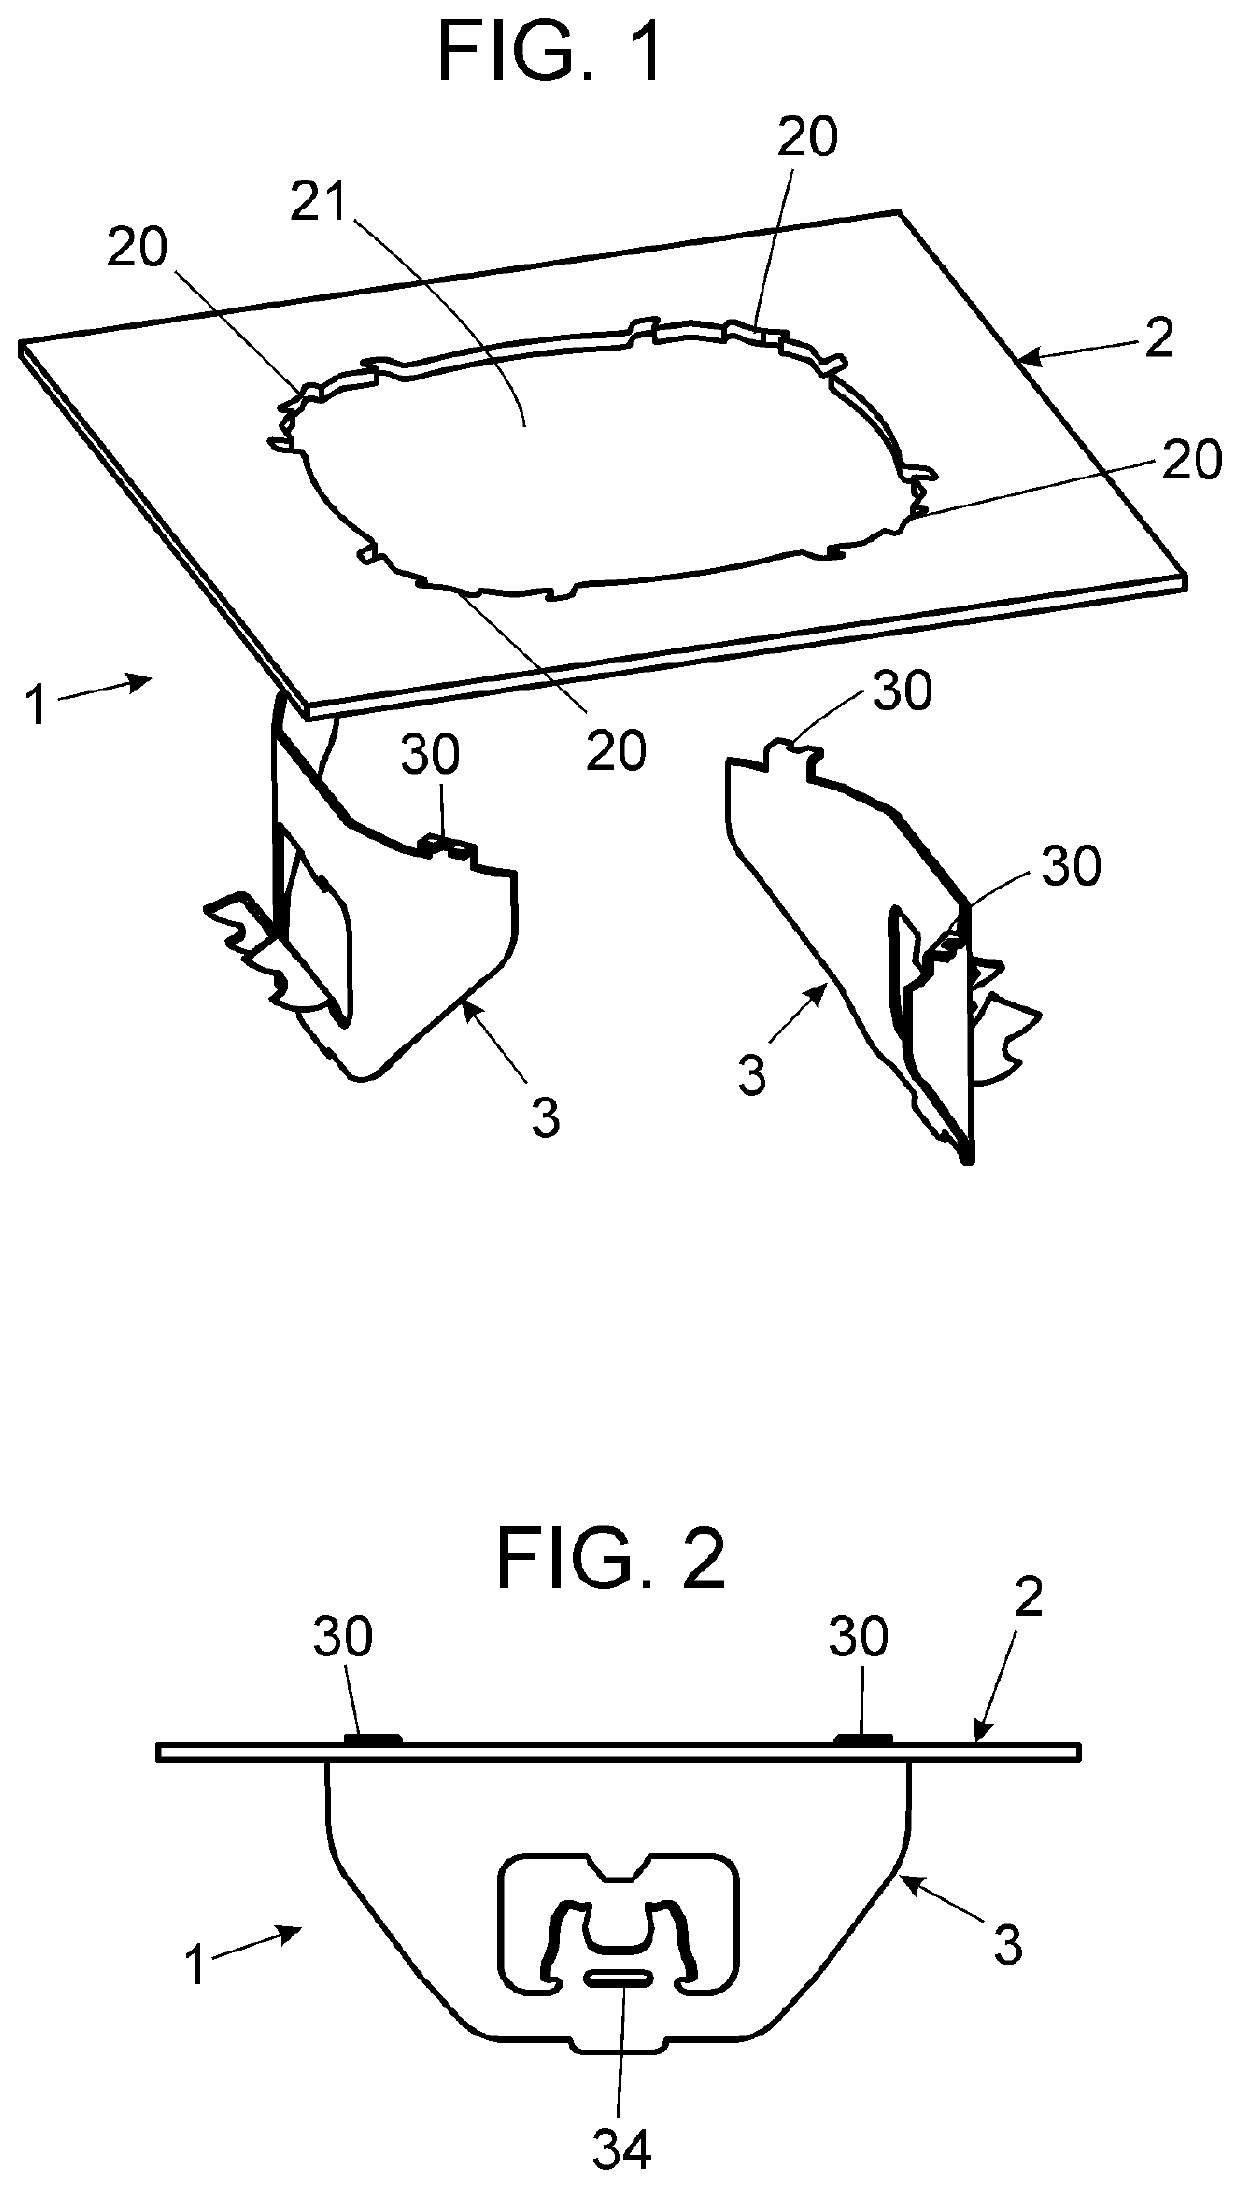 Fastening assembly for electric and/or electronic devices that can be built-in